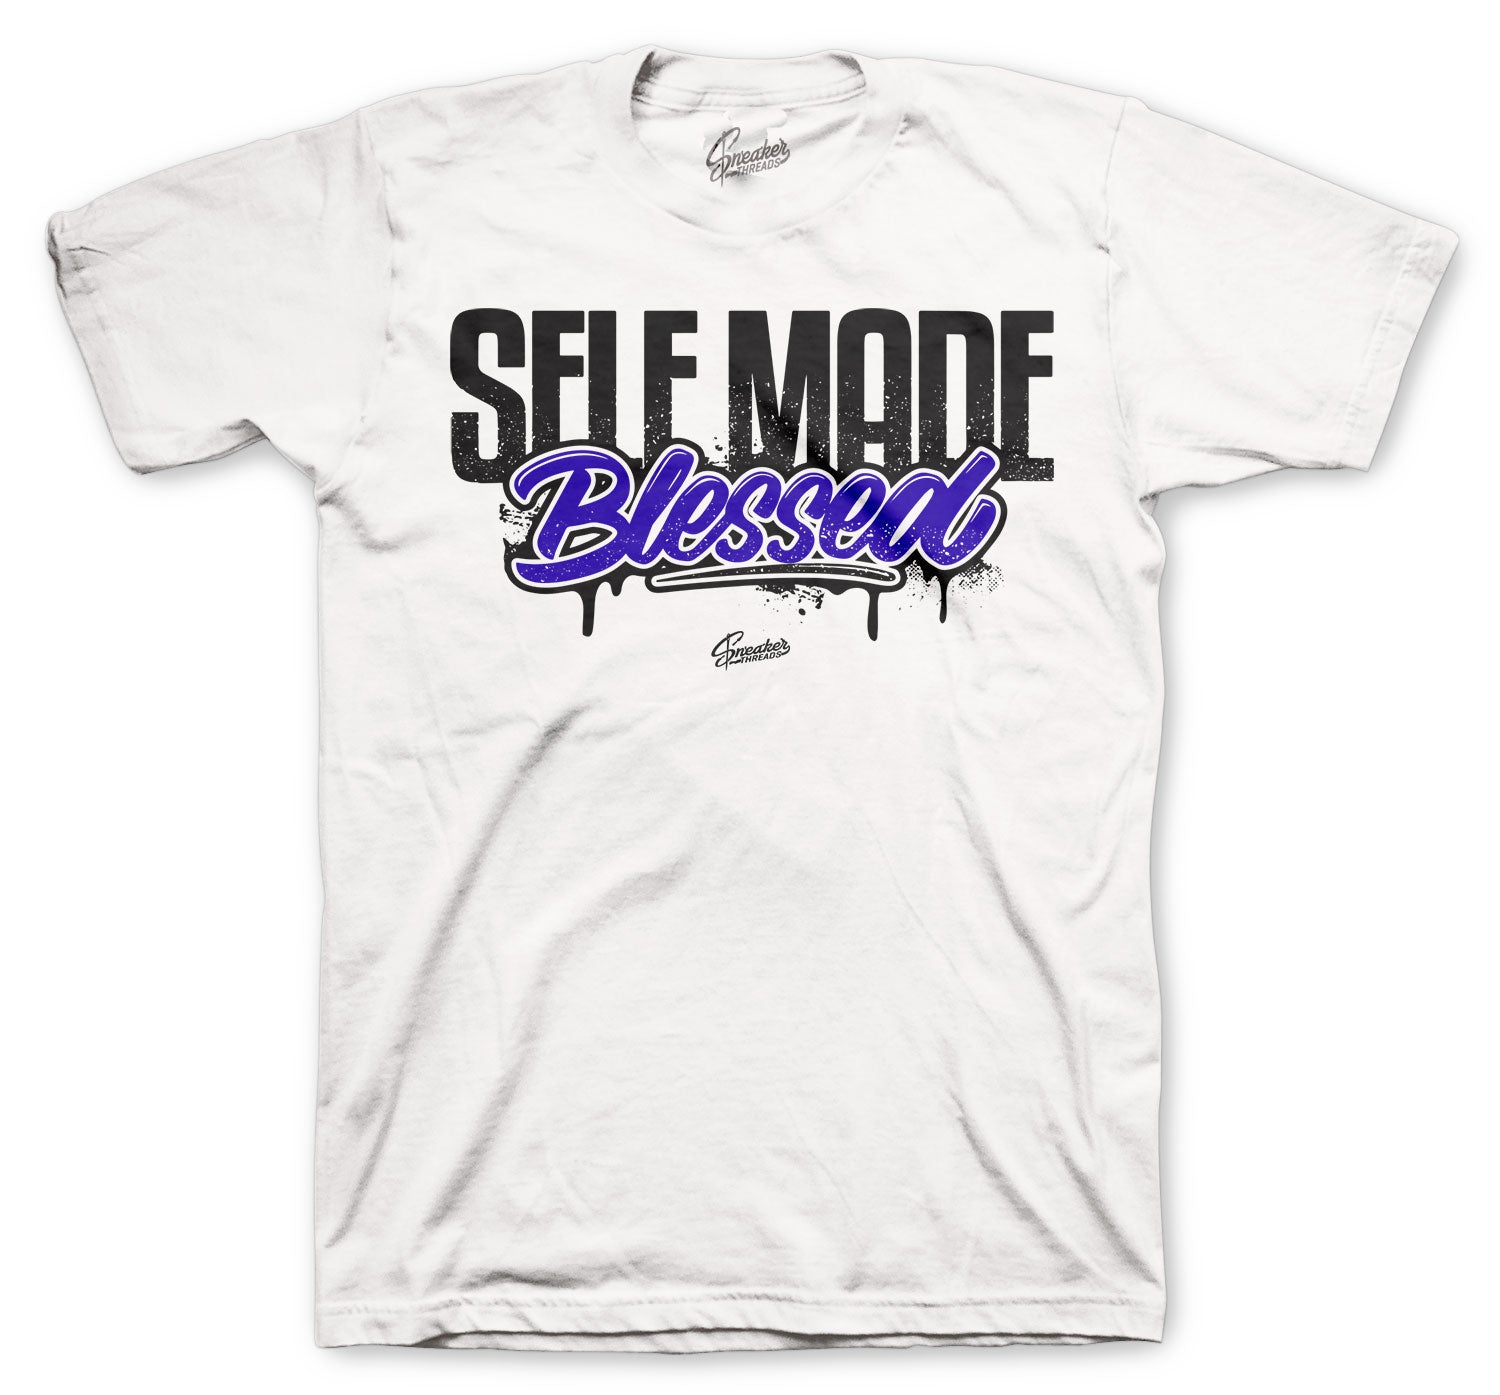 shirts to go with concord 11s